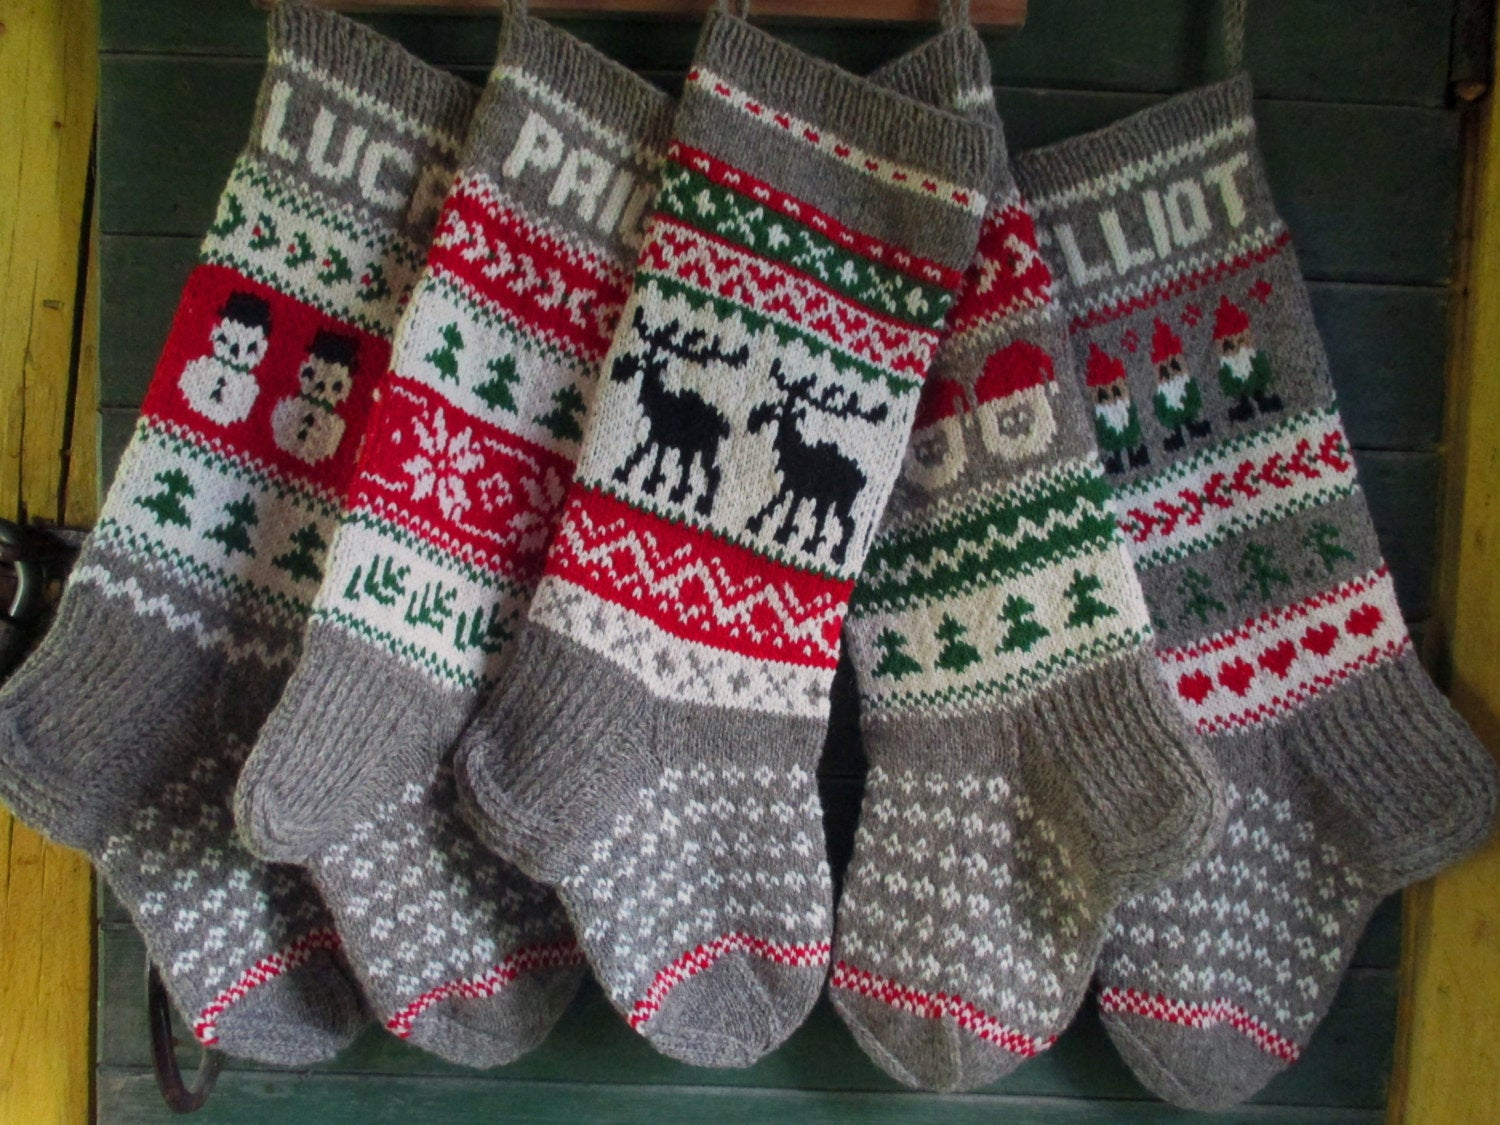 Knitted Christmas Stocking Patterns Personalized Knit Christmas Stockings 24 Or 26 Personalized Gray Red Green White Deer Santa Gnomes Snowman Snowflakes Trees Ornament